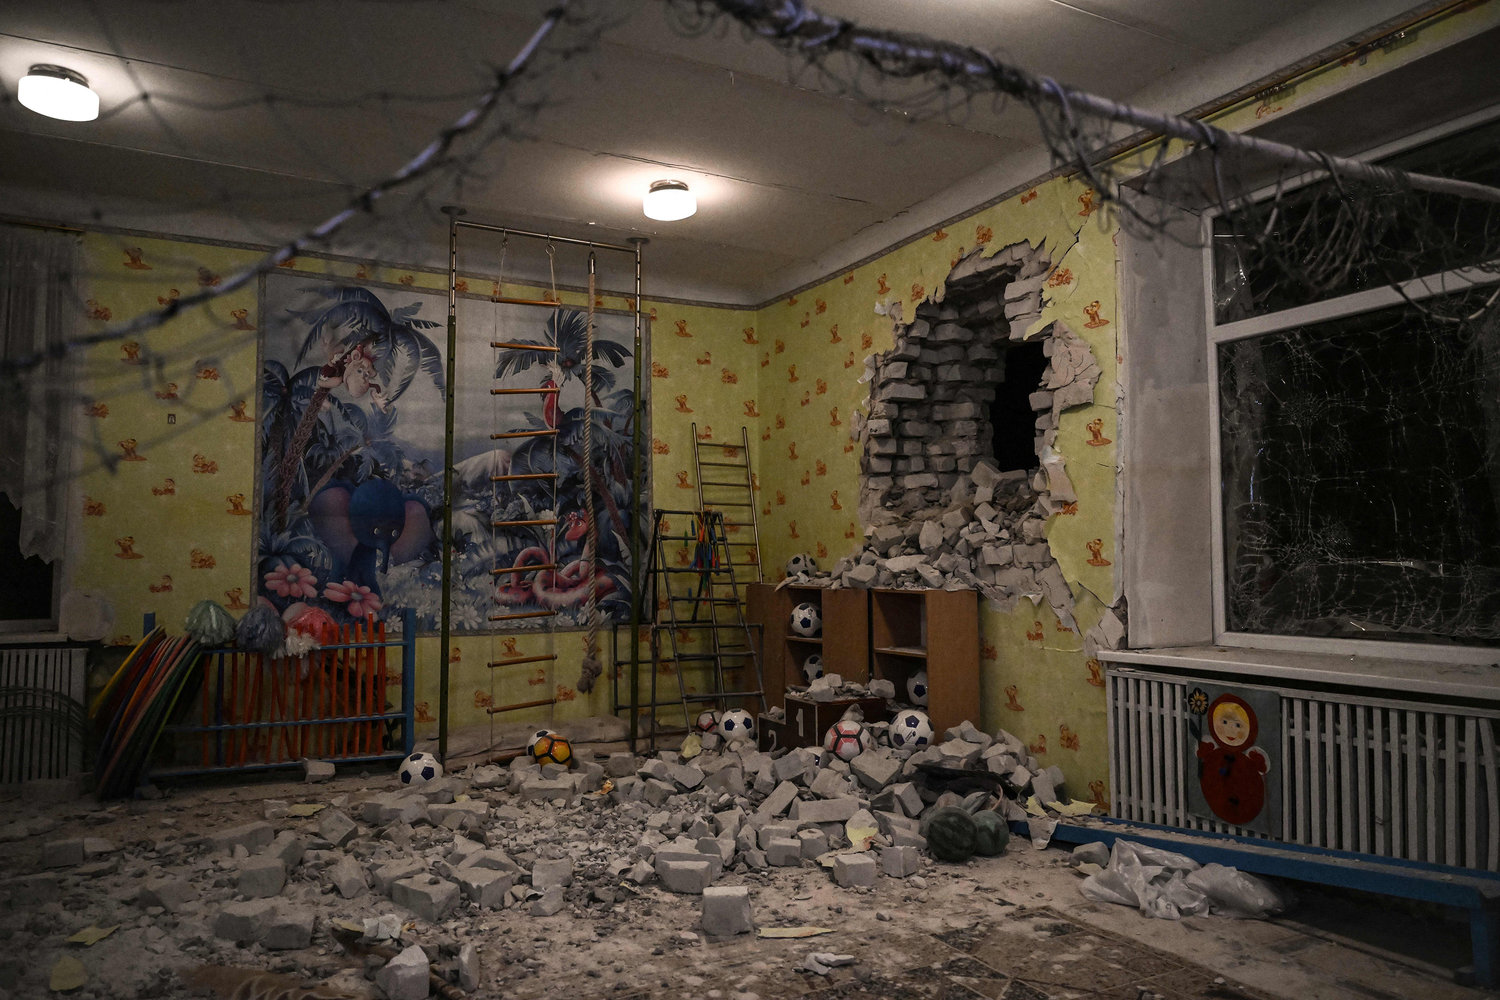 A photograph shows debris after the reported shelling of a kindergarden in the settlement of Stanytsia Luhanska, Ukraine, on Thursday, Feb. 17, 2022. U.S. Defense Secretary Lloyd Austin warned on Feb. 17, 2022, of a provocation by Moscow to justify military intervention in Ukraine after "disturbing" reports of mutual accusations of bombing between the Ukrainian military and pro-Russian separatists. (Aris Messinis/AFP/Getty Images/TNS)